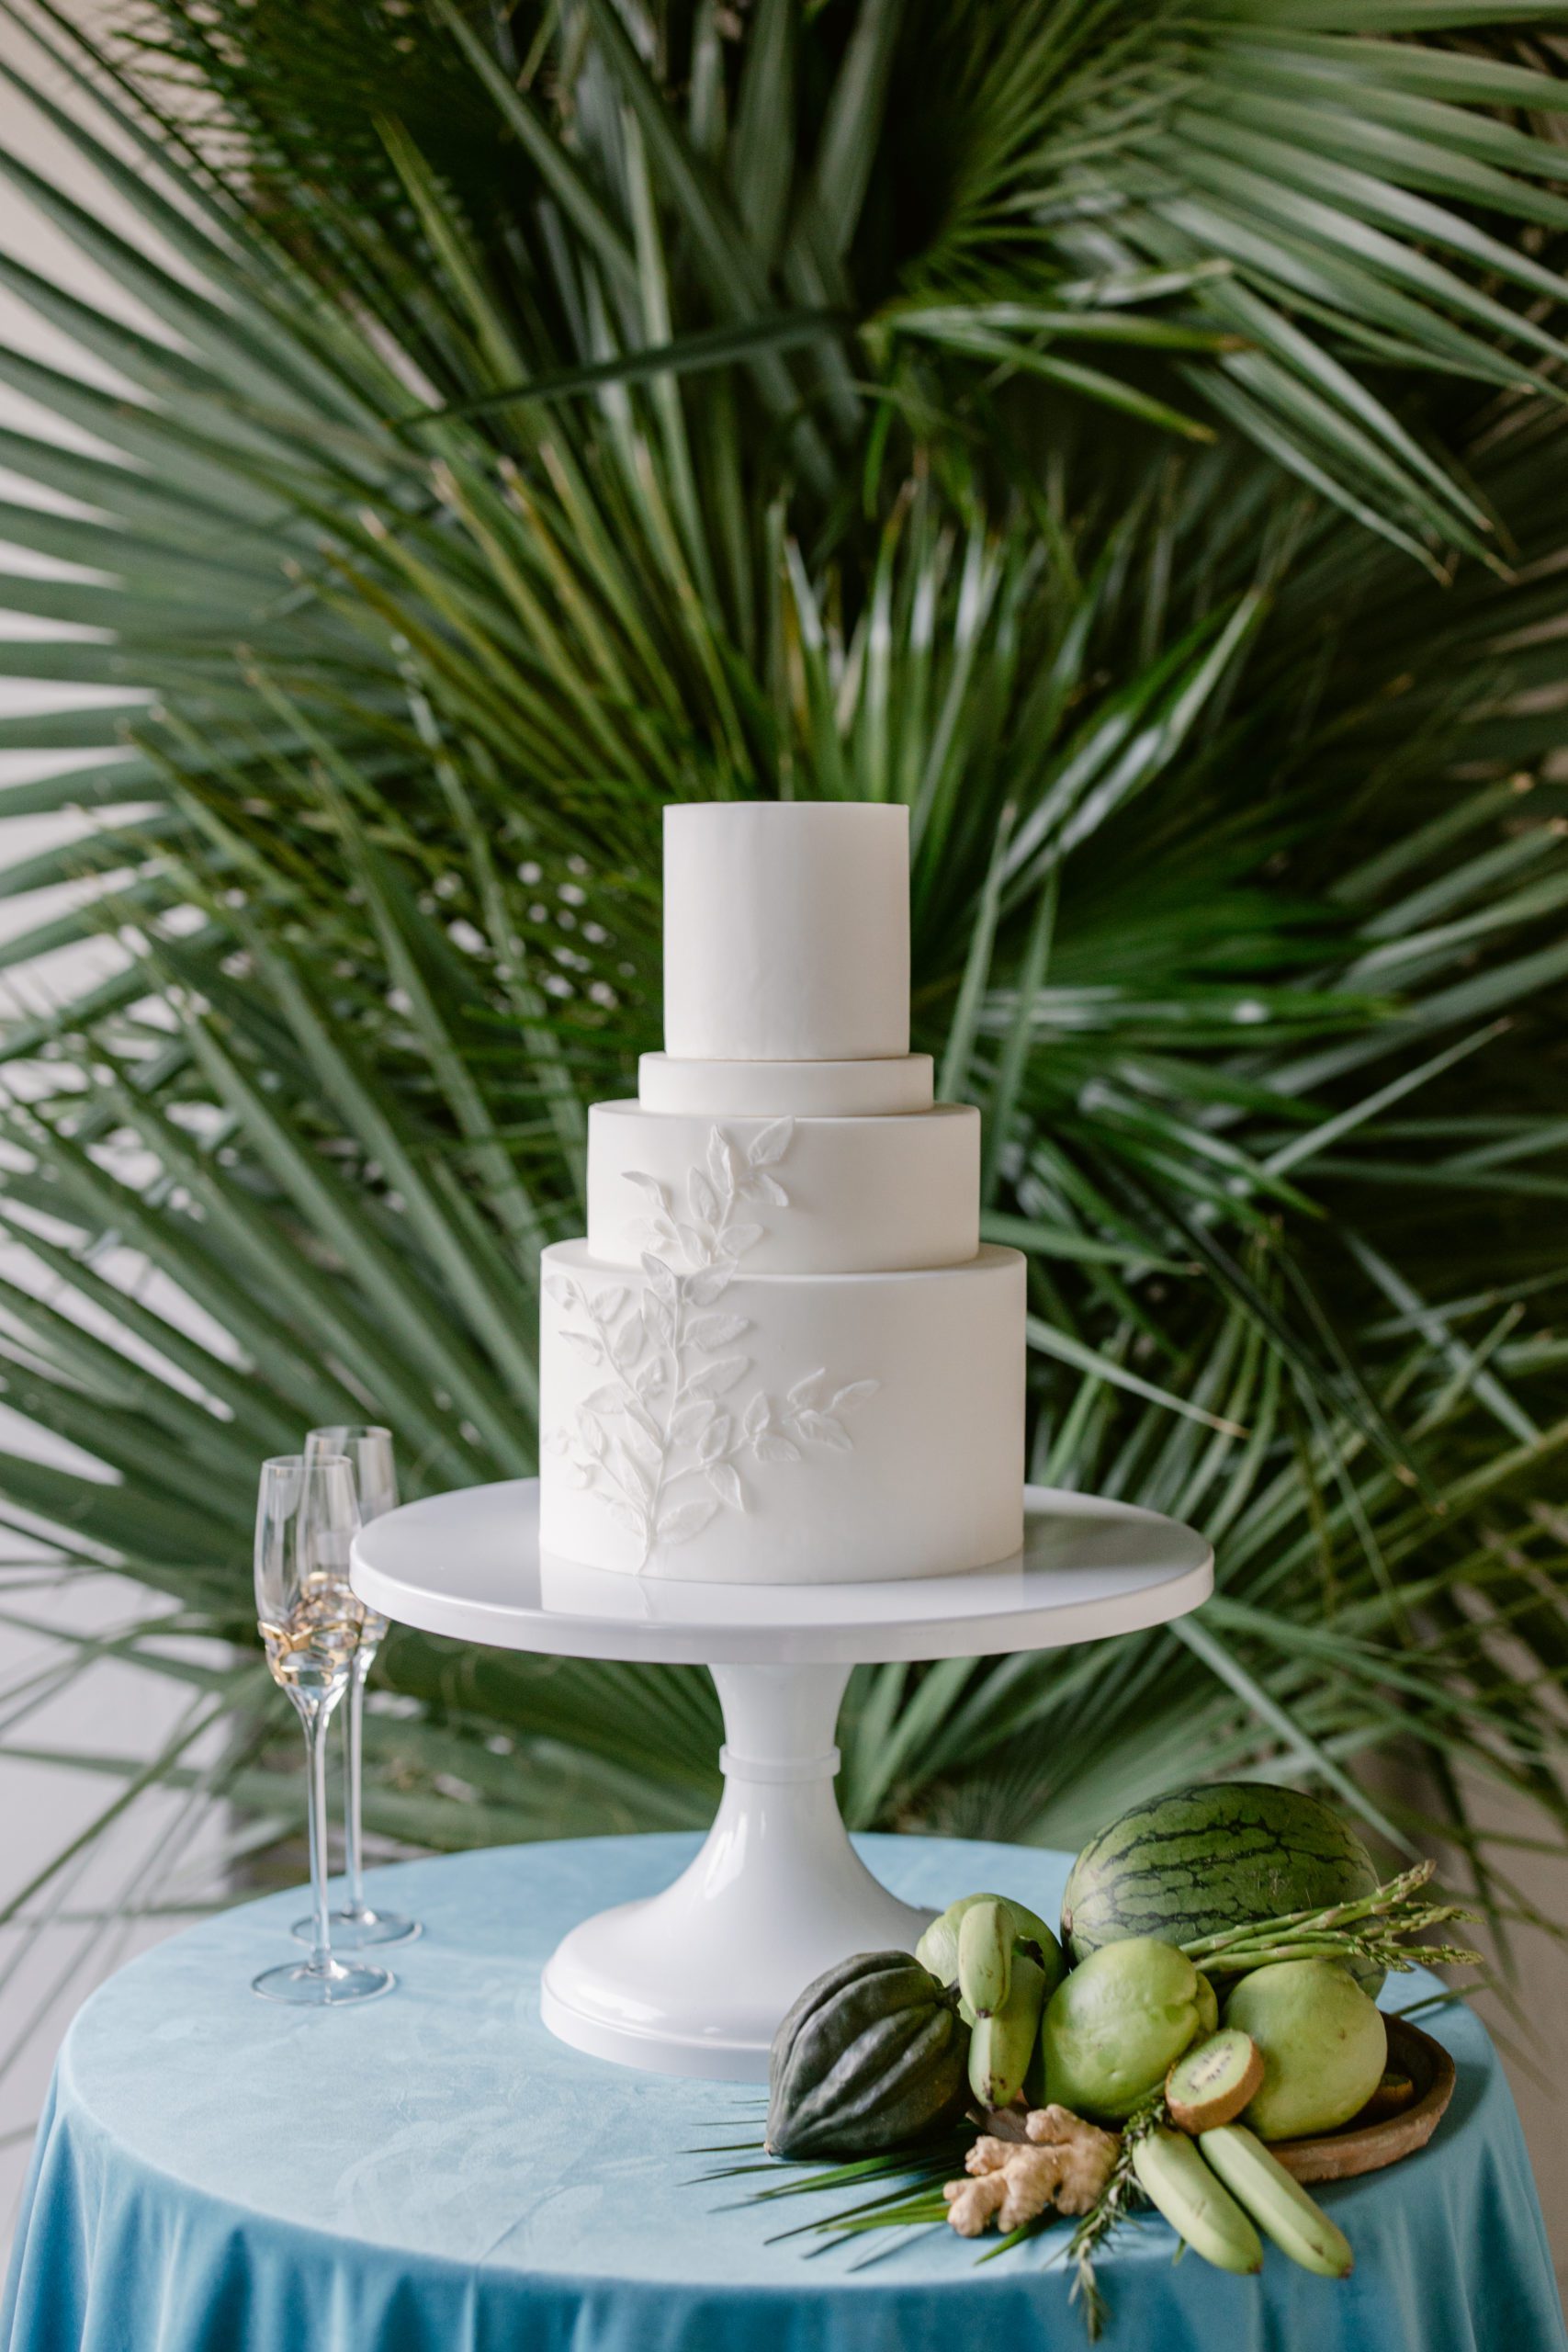 Destination wedding cake with Palm leaves